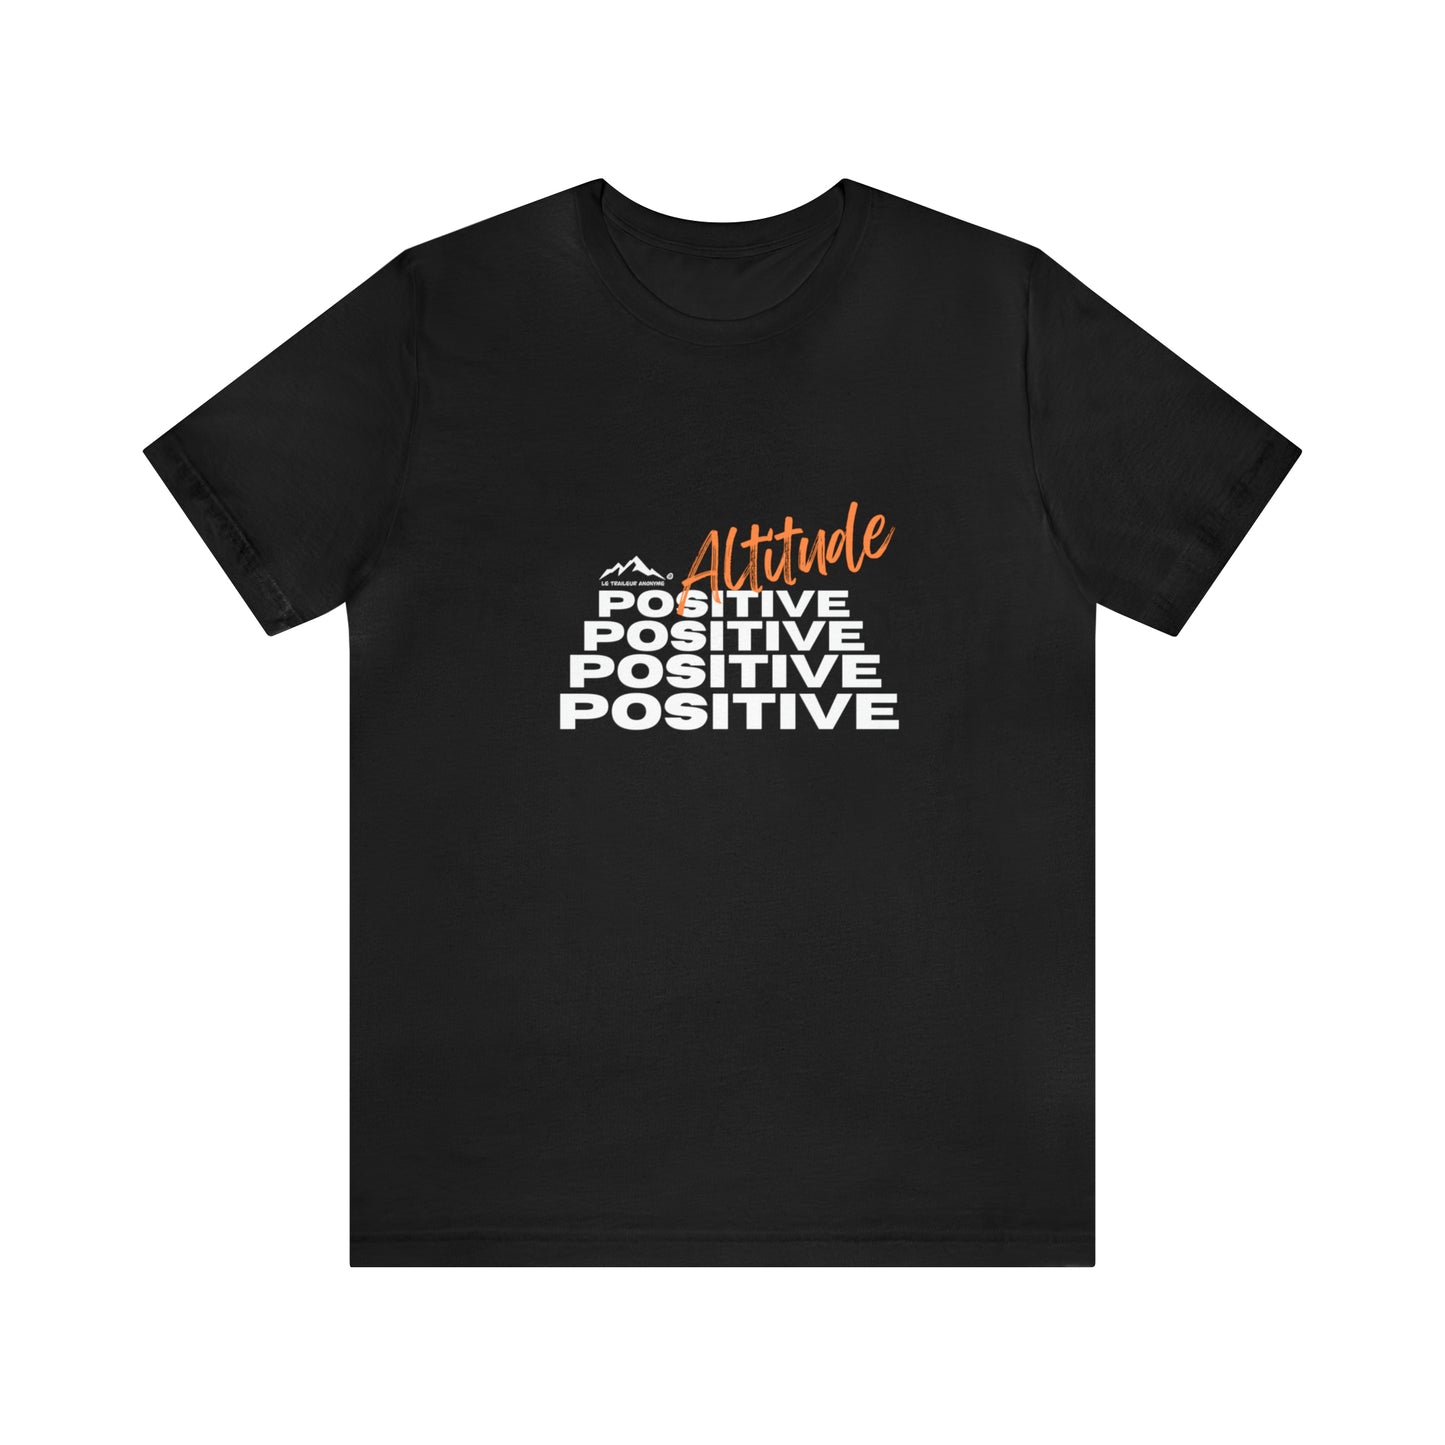 T-Shirt Jersey- Unisexe  - Collection "Positive Altitude" (250)